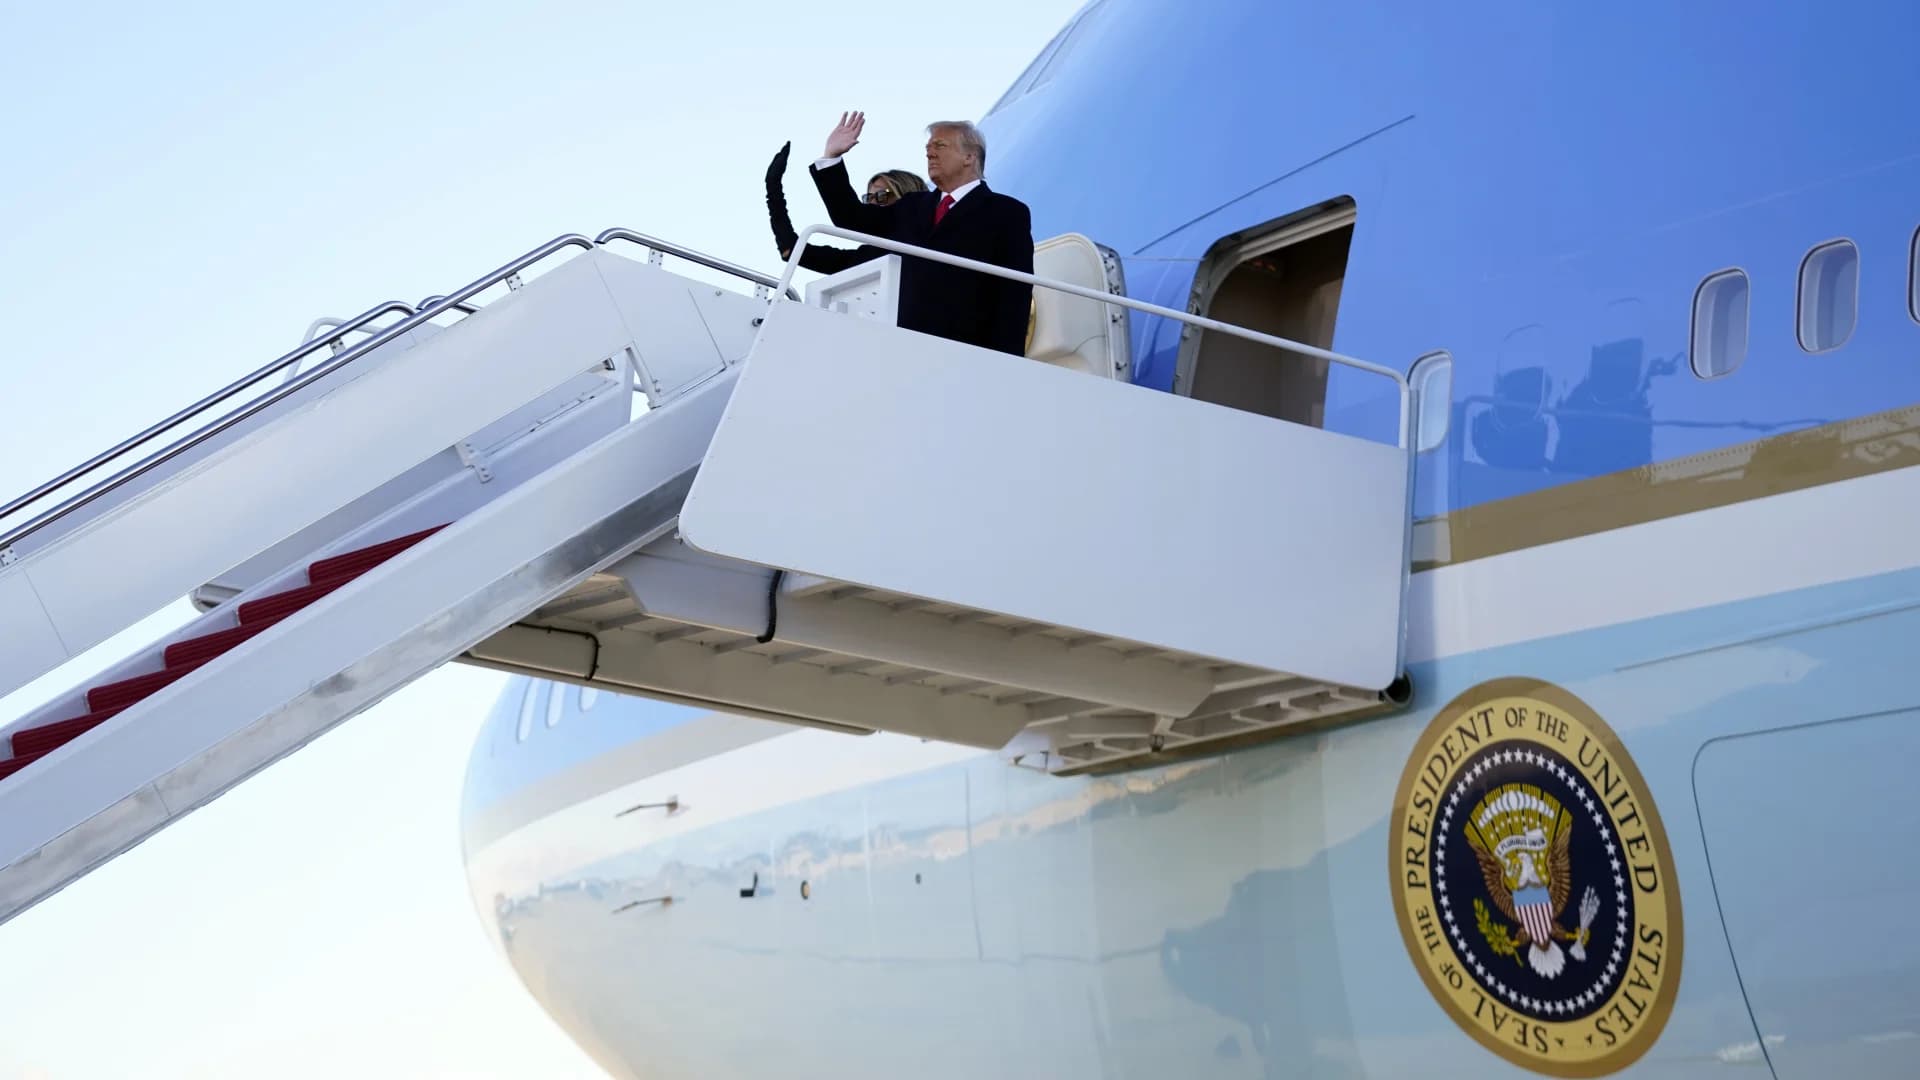 PHOTOS: President Trump leaves White House, gives remarks before boarding Air Force One for last time